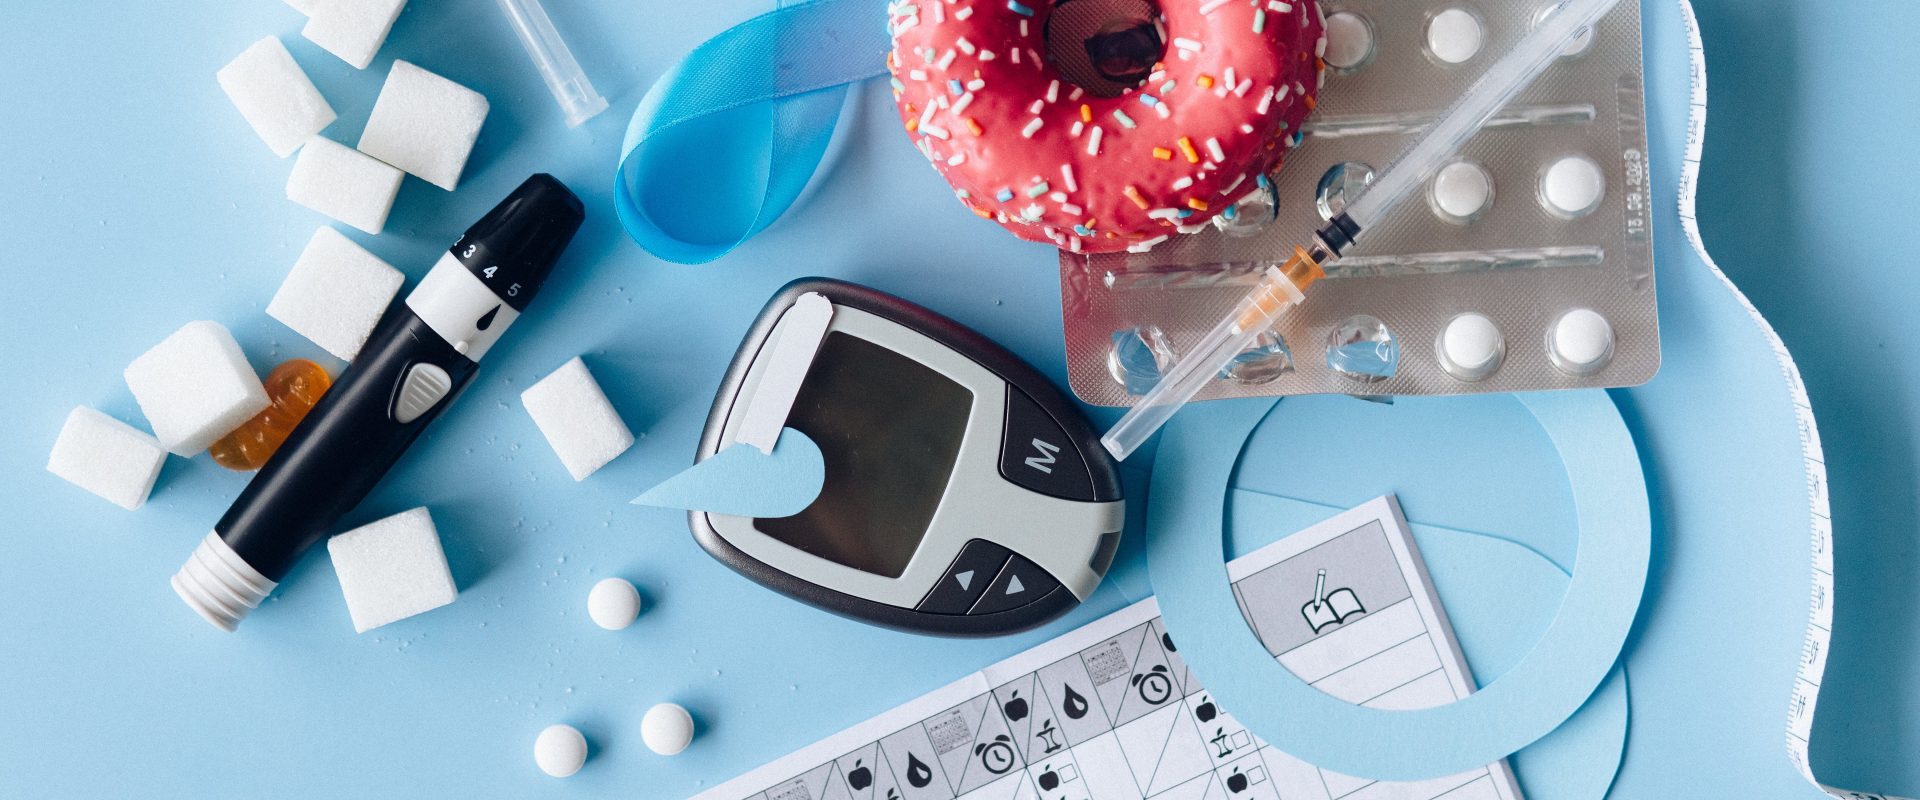 Navigating blood sugar and avoiding glucose spikes